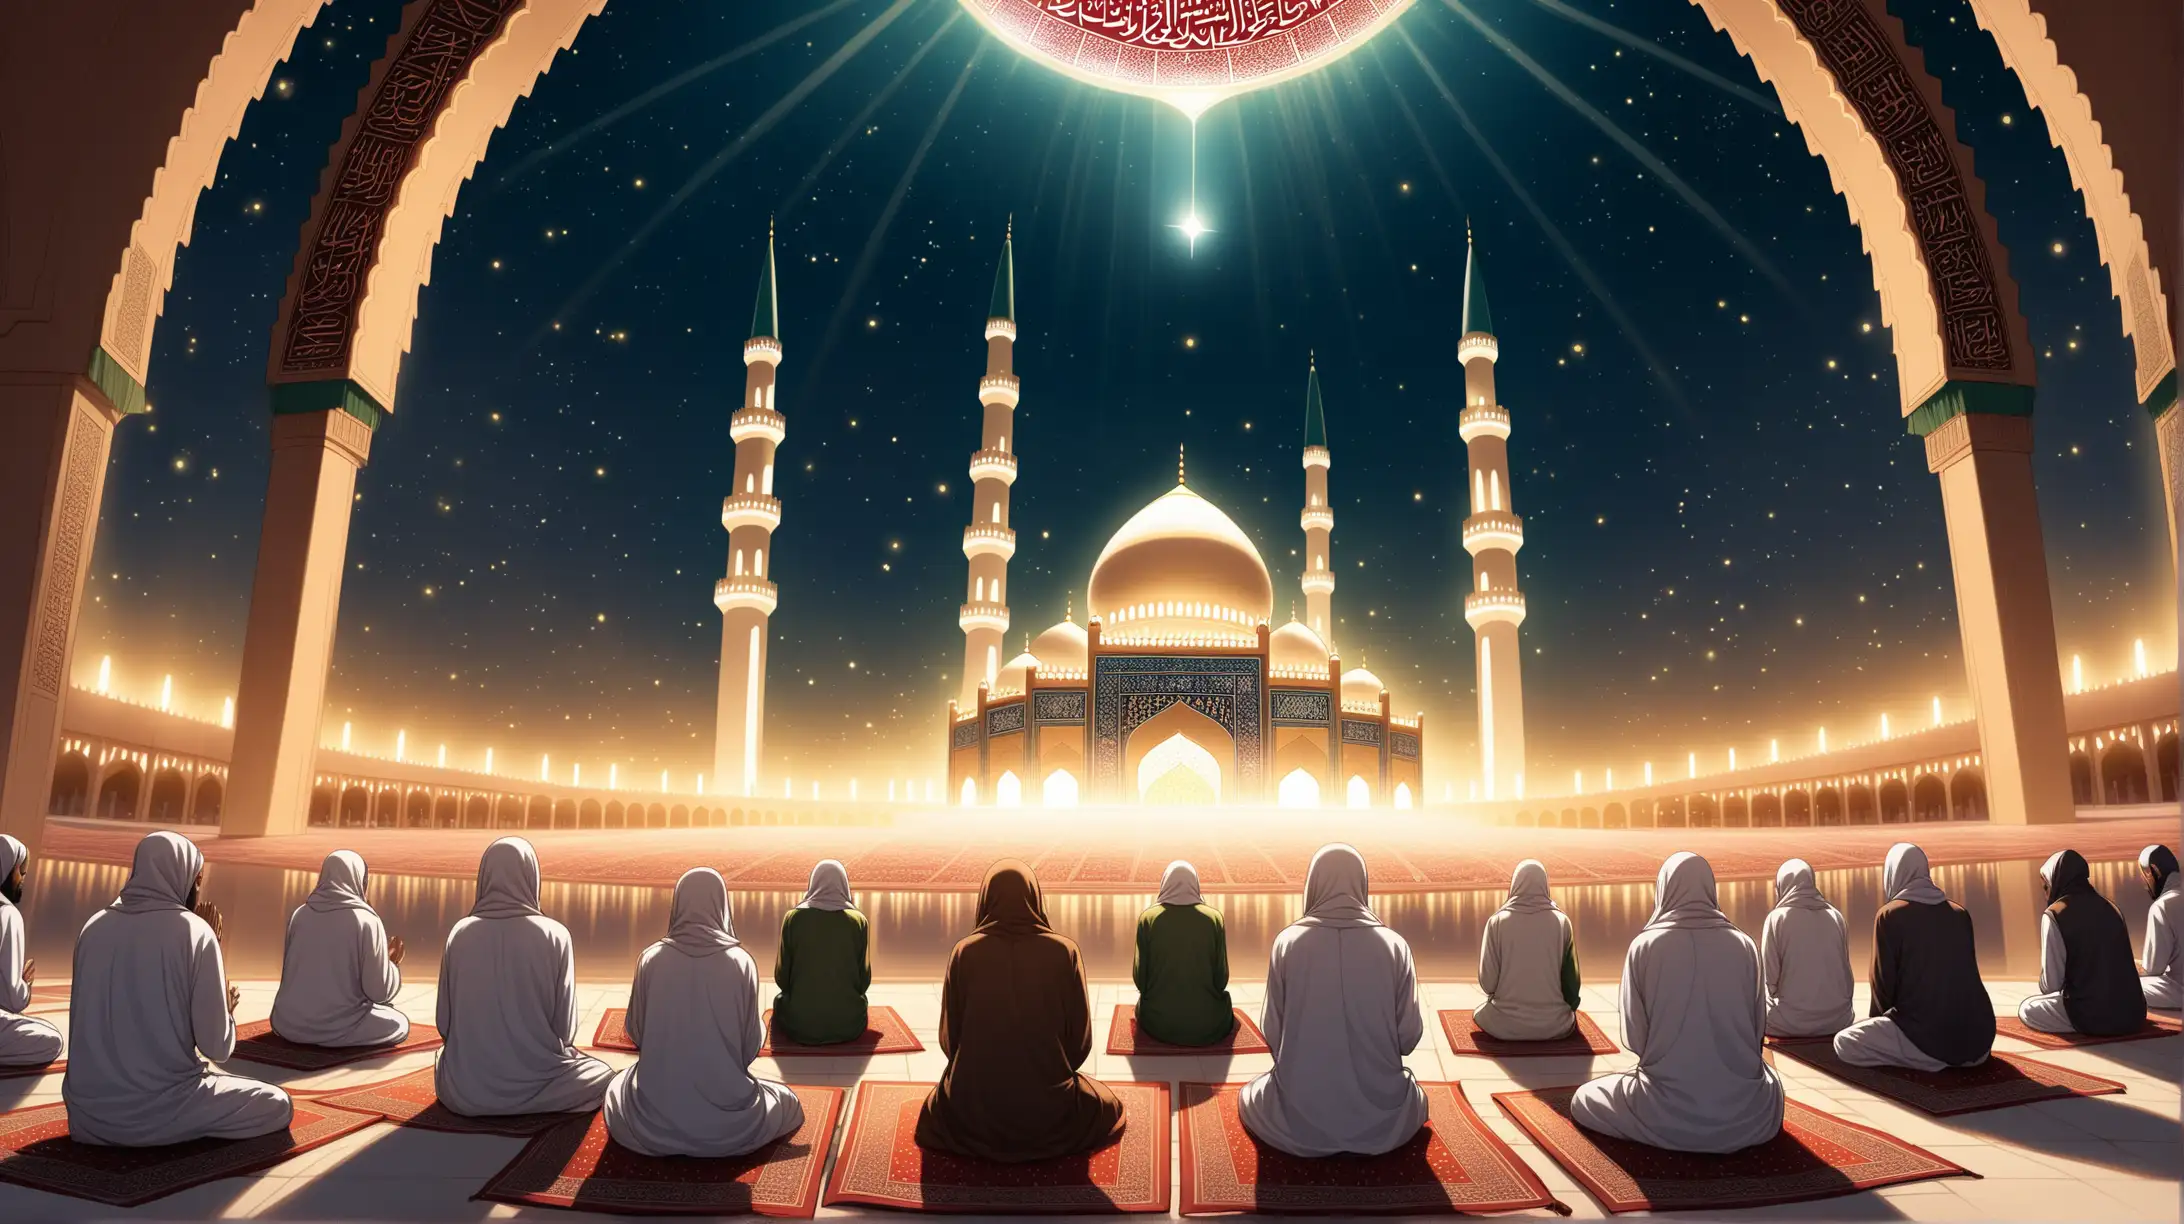 For a photo representing Surah Al-Fath, consider an image of a serene mosque or a group of worshippers engaged in prayer, with a subtle glow or light emanating from the scene, symbolizing the enlightenment and guidance found in the verses of this chapter. You could also incorporate elements such as an open Quran with the text of Surah Al-Fath visible, or a depiction of the victorious and peaceful atmosphere described in the Surah.